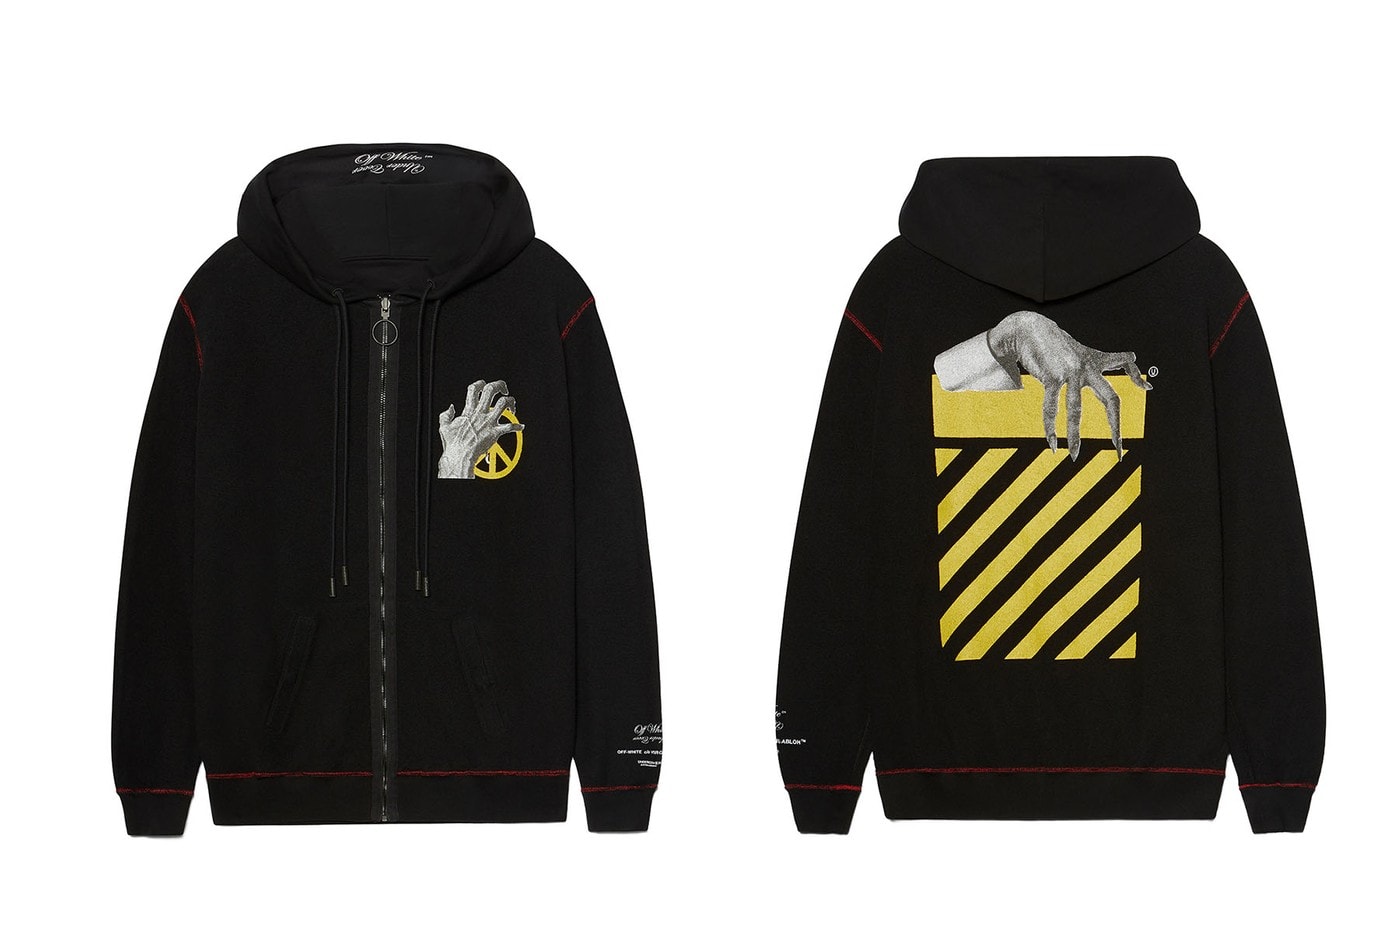 Off-White x Undercover Are Dropping A Capsule Collection This